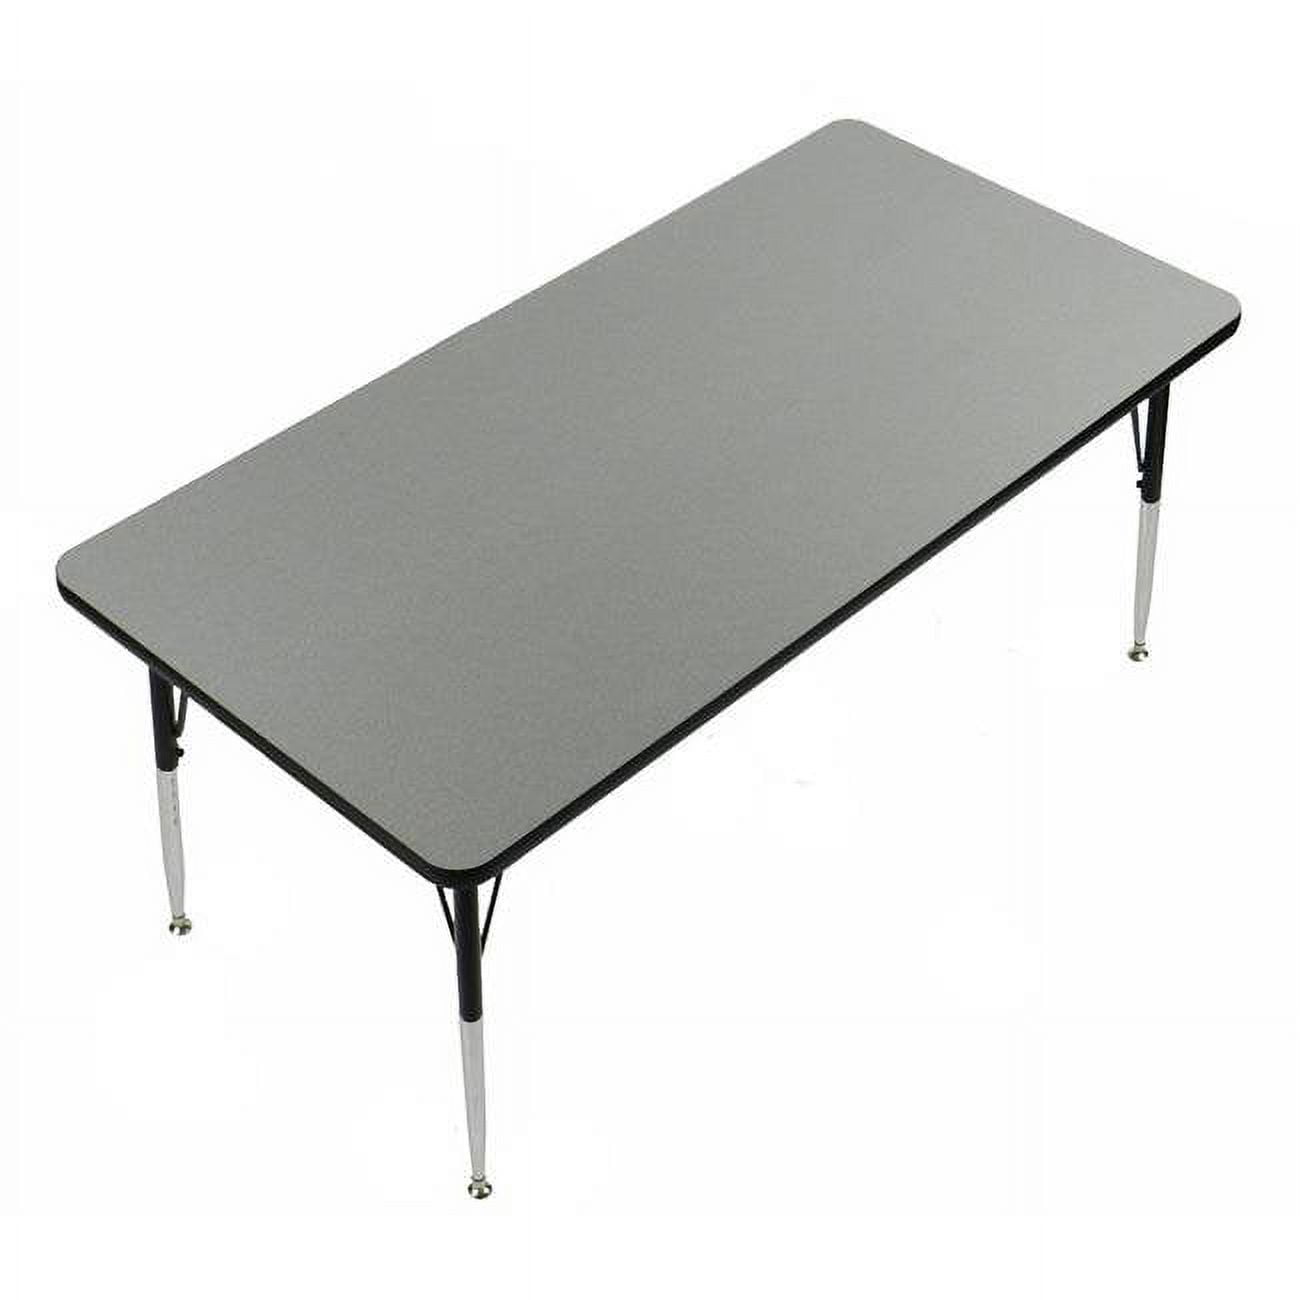 Picture of Correll A6066-HOR-55 1.25 in. High Pressure Top Horseshoe Activity Tables, Montana Granite - 60 x 66 in.